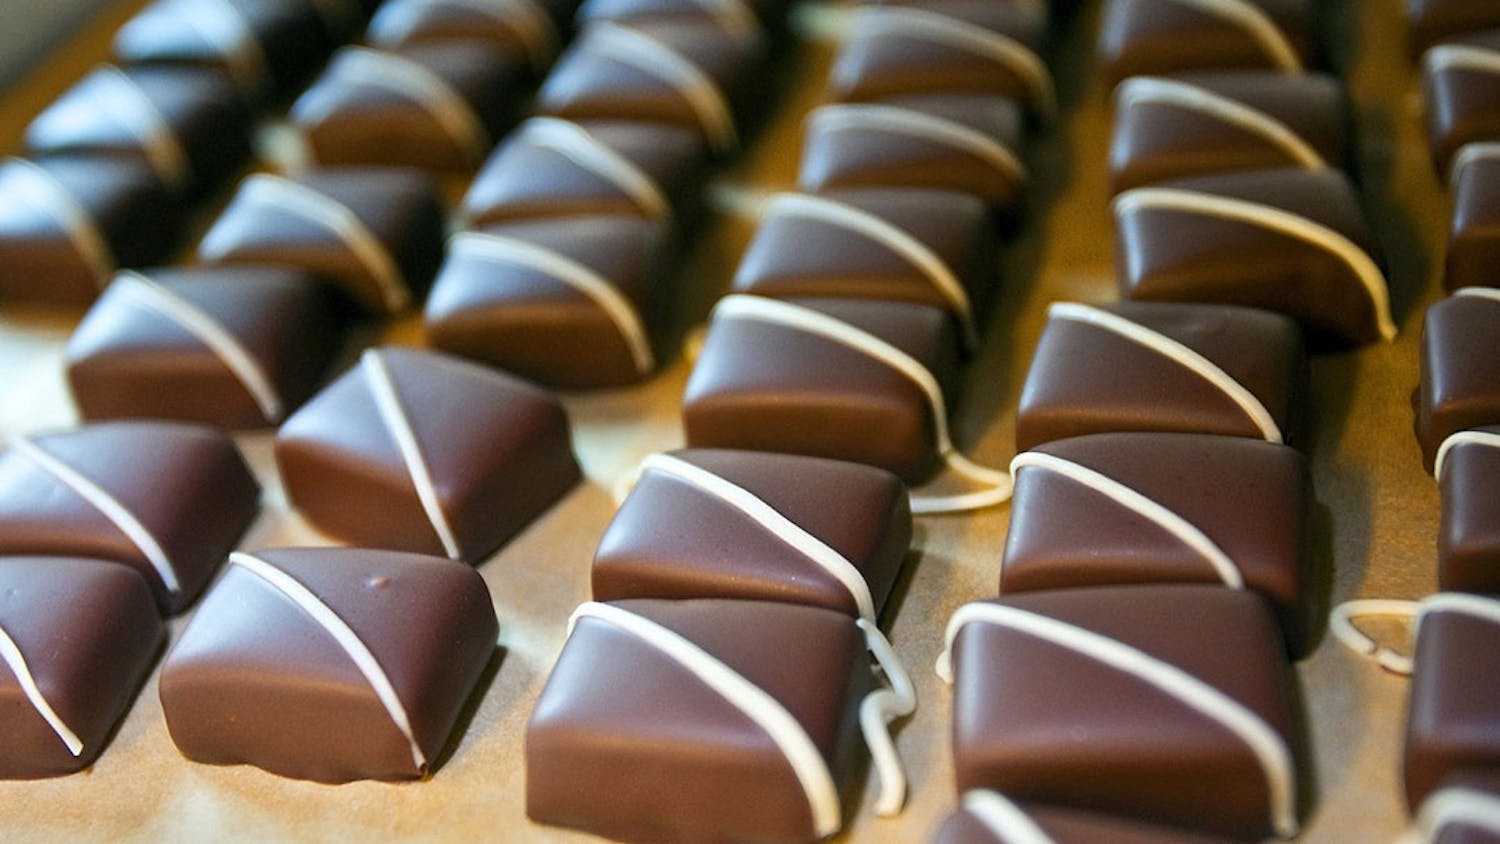 Organic, fair-trade Theo chocolates are stored on trays after cooling in Freemont, Washington